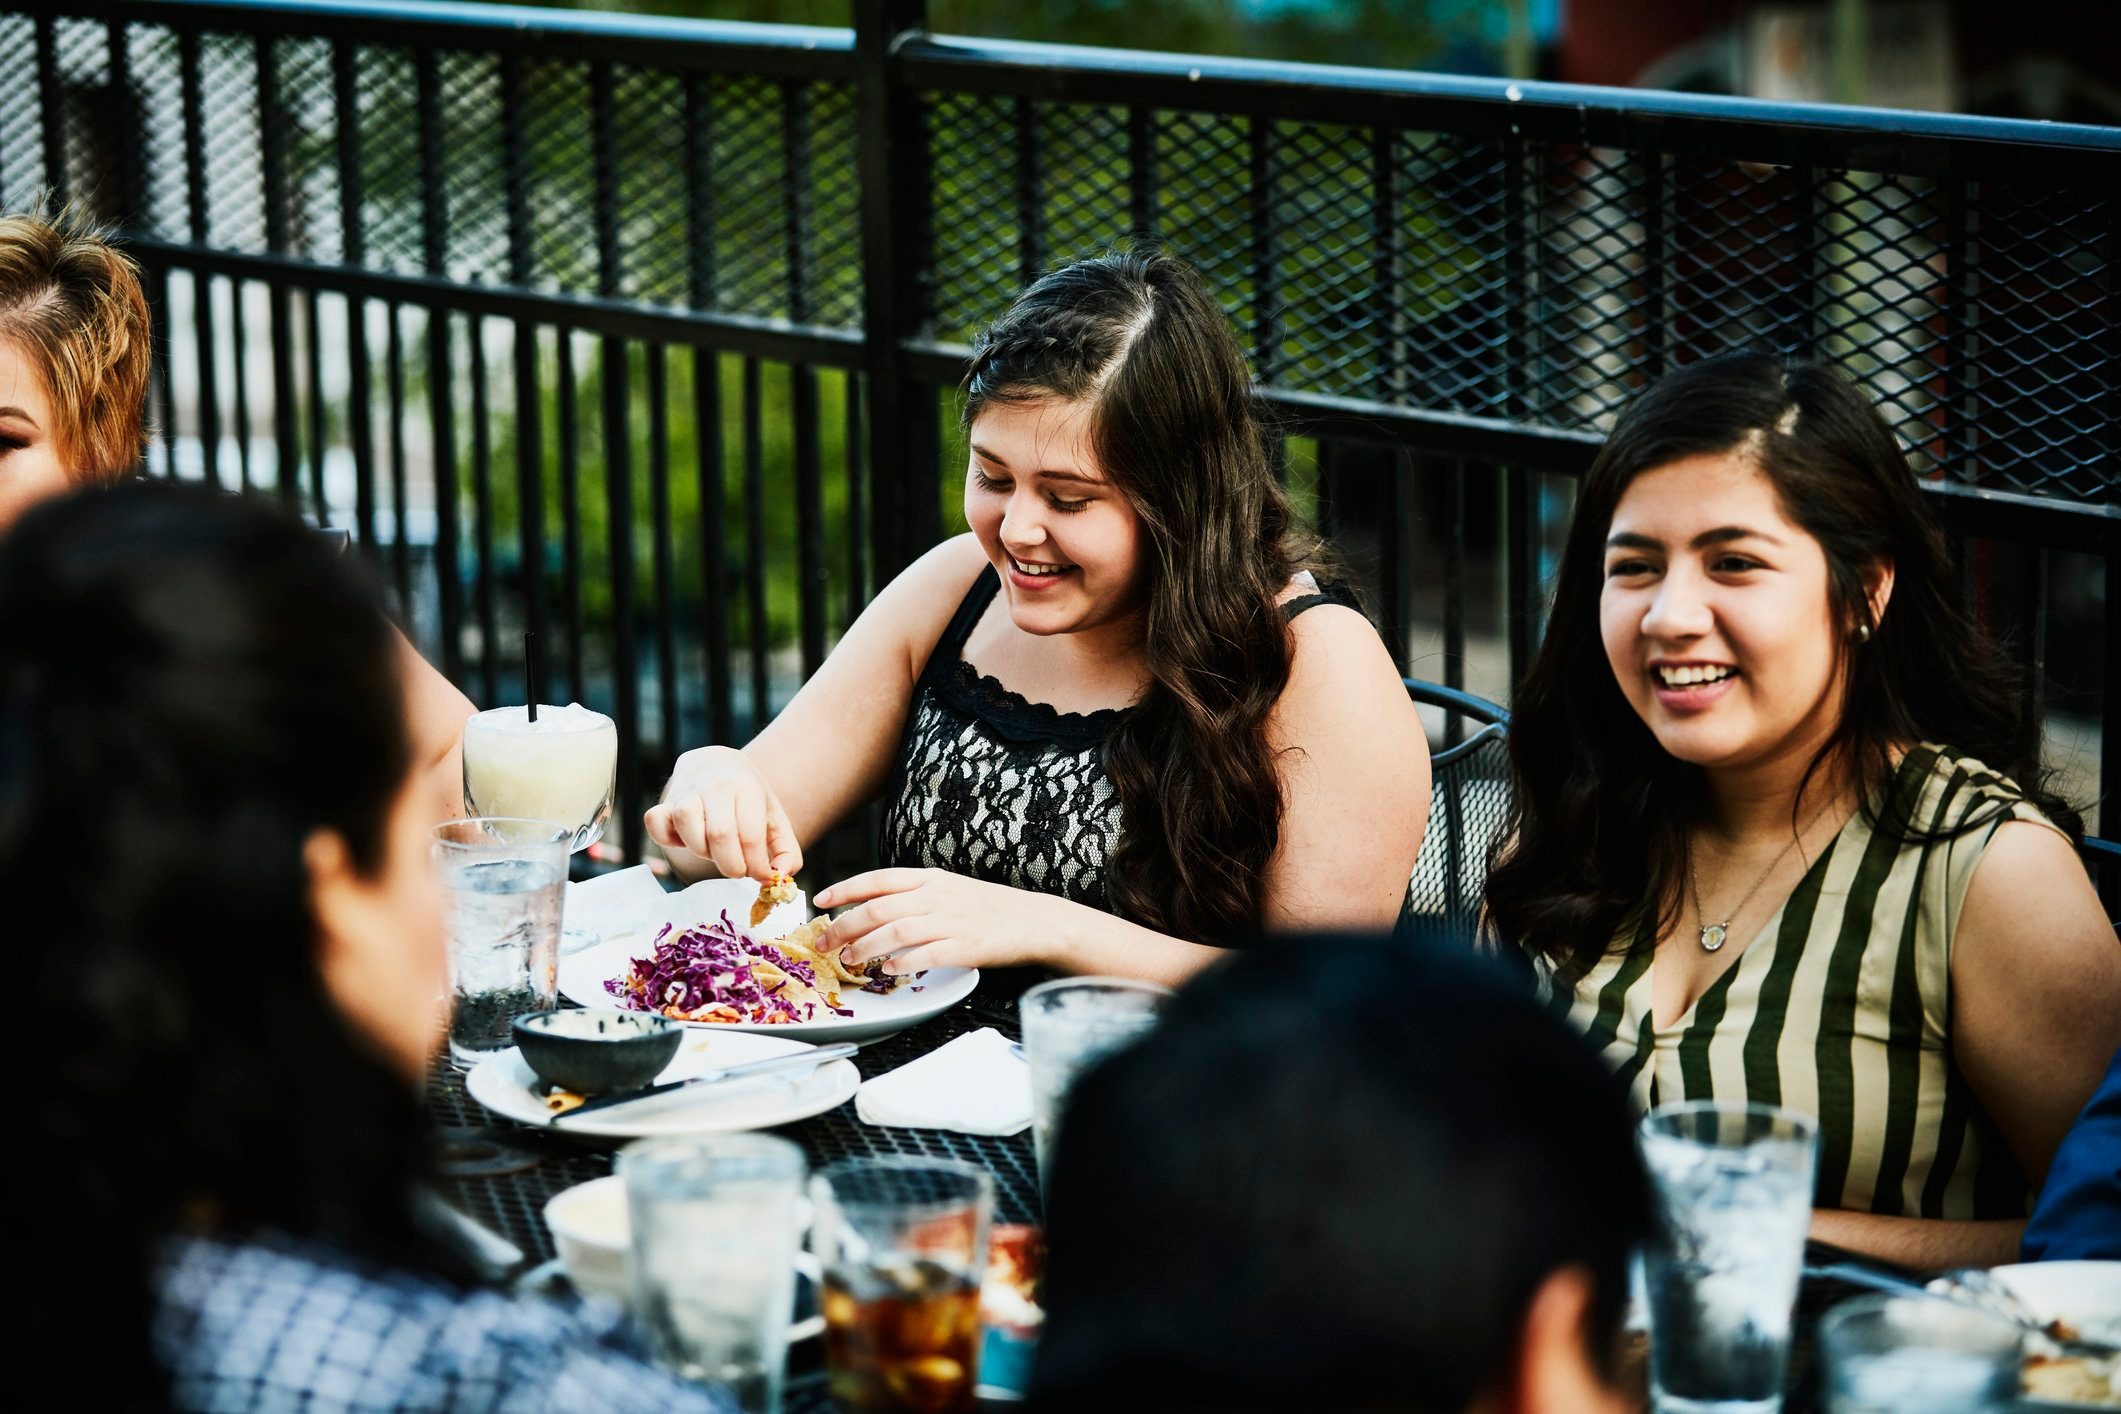 Laughing young women sharing a meal with family on restaurant deck